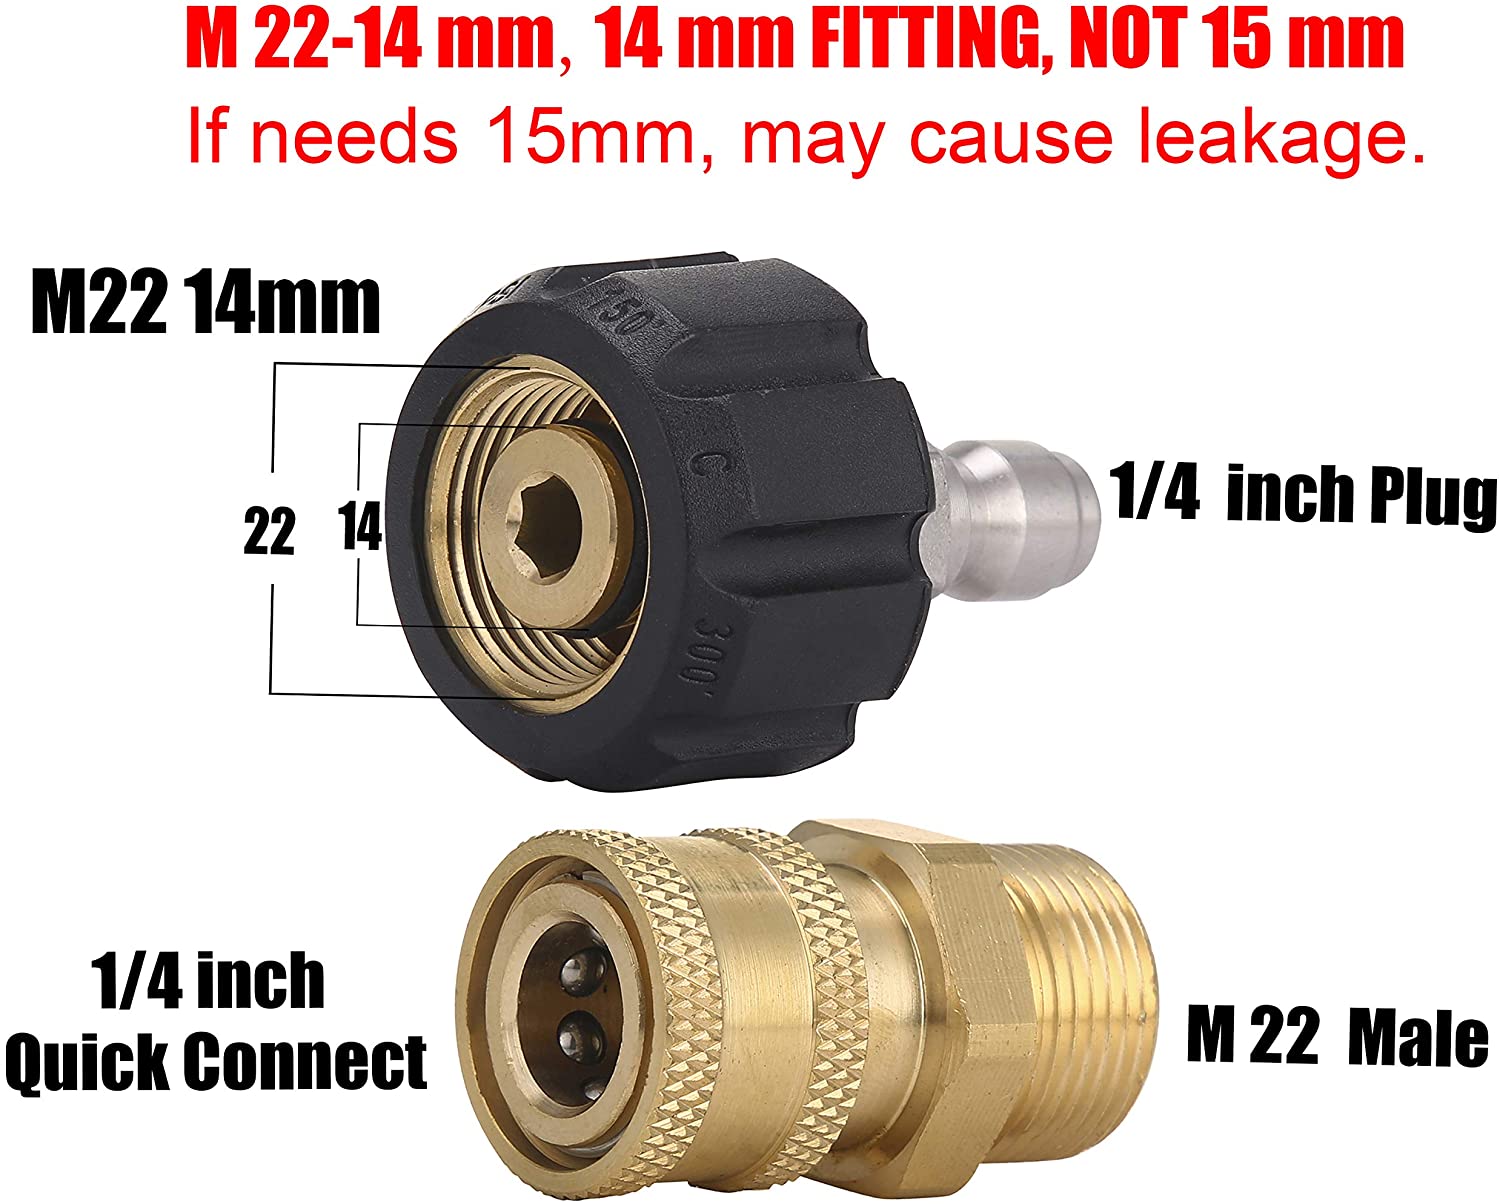 High Pressure Washer Adapter Set, Gun to Wand M22 to 1/4'' Quick Connect